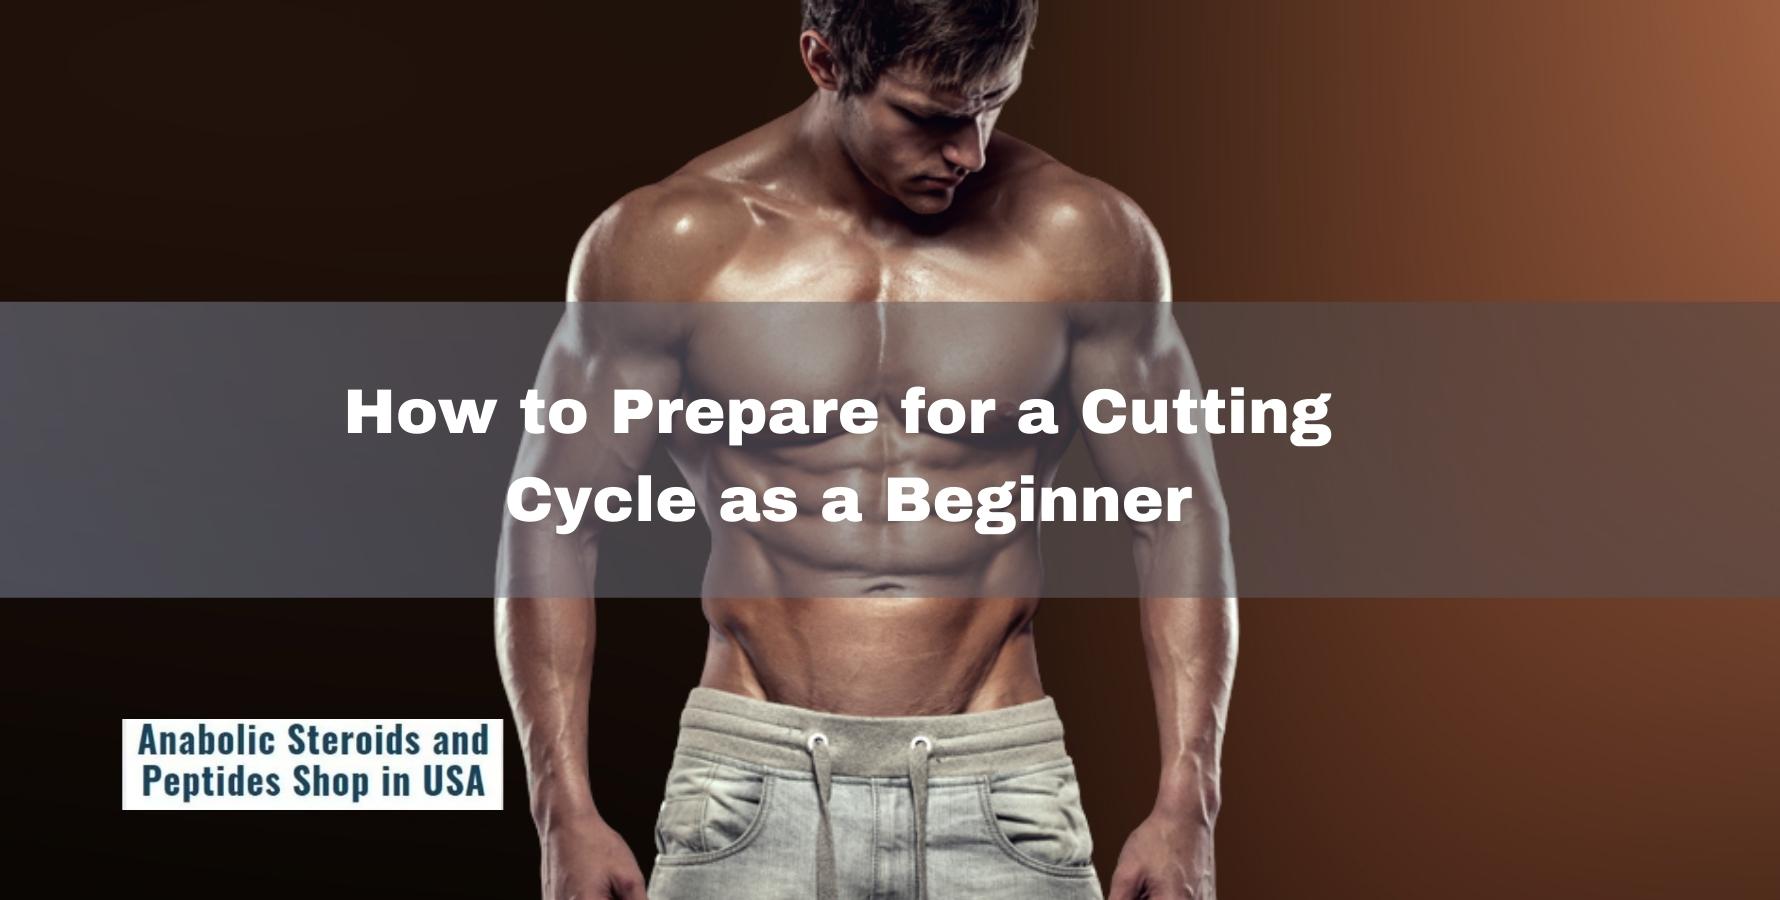 Cutting Cycle as a Beginner